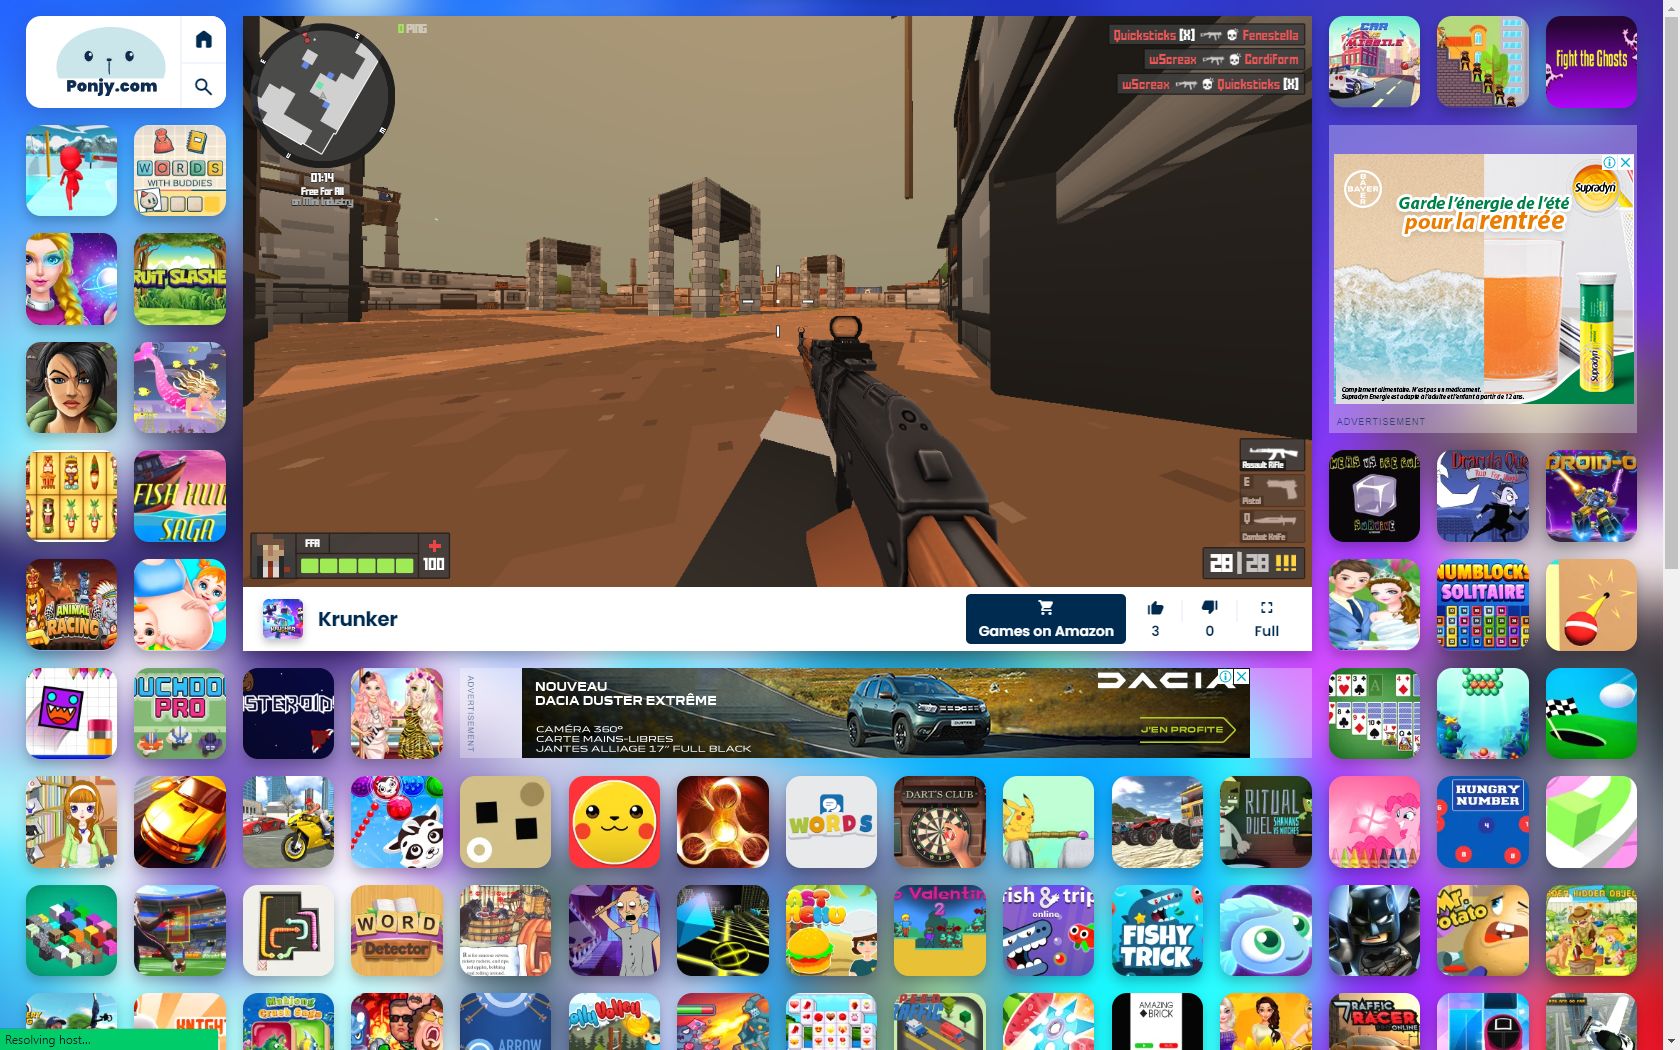 Roblox, now on Y8 Browser. It's supposed to be used for playing